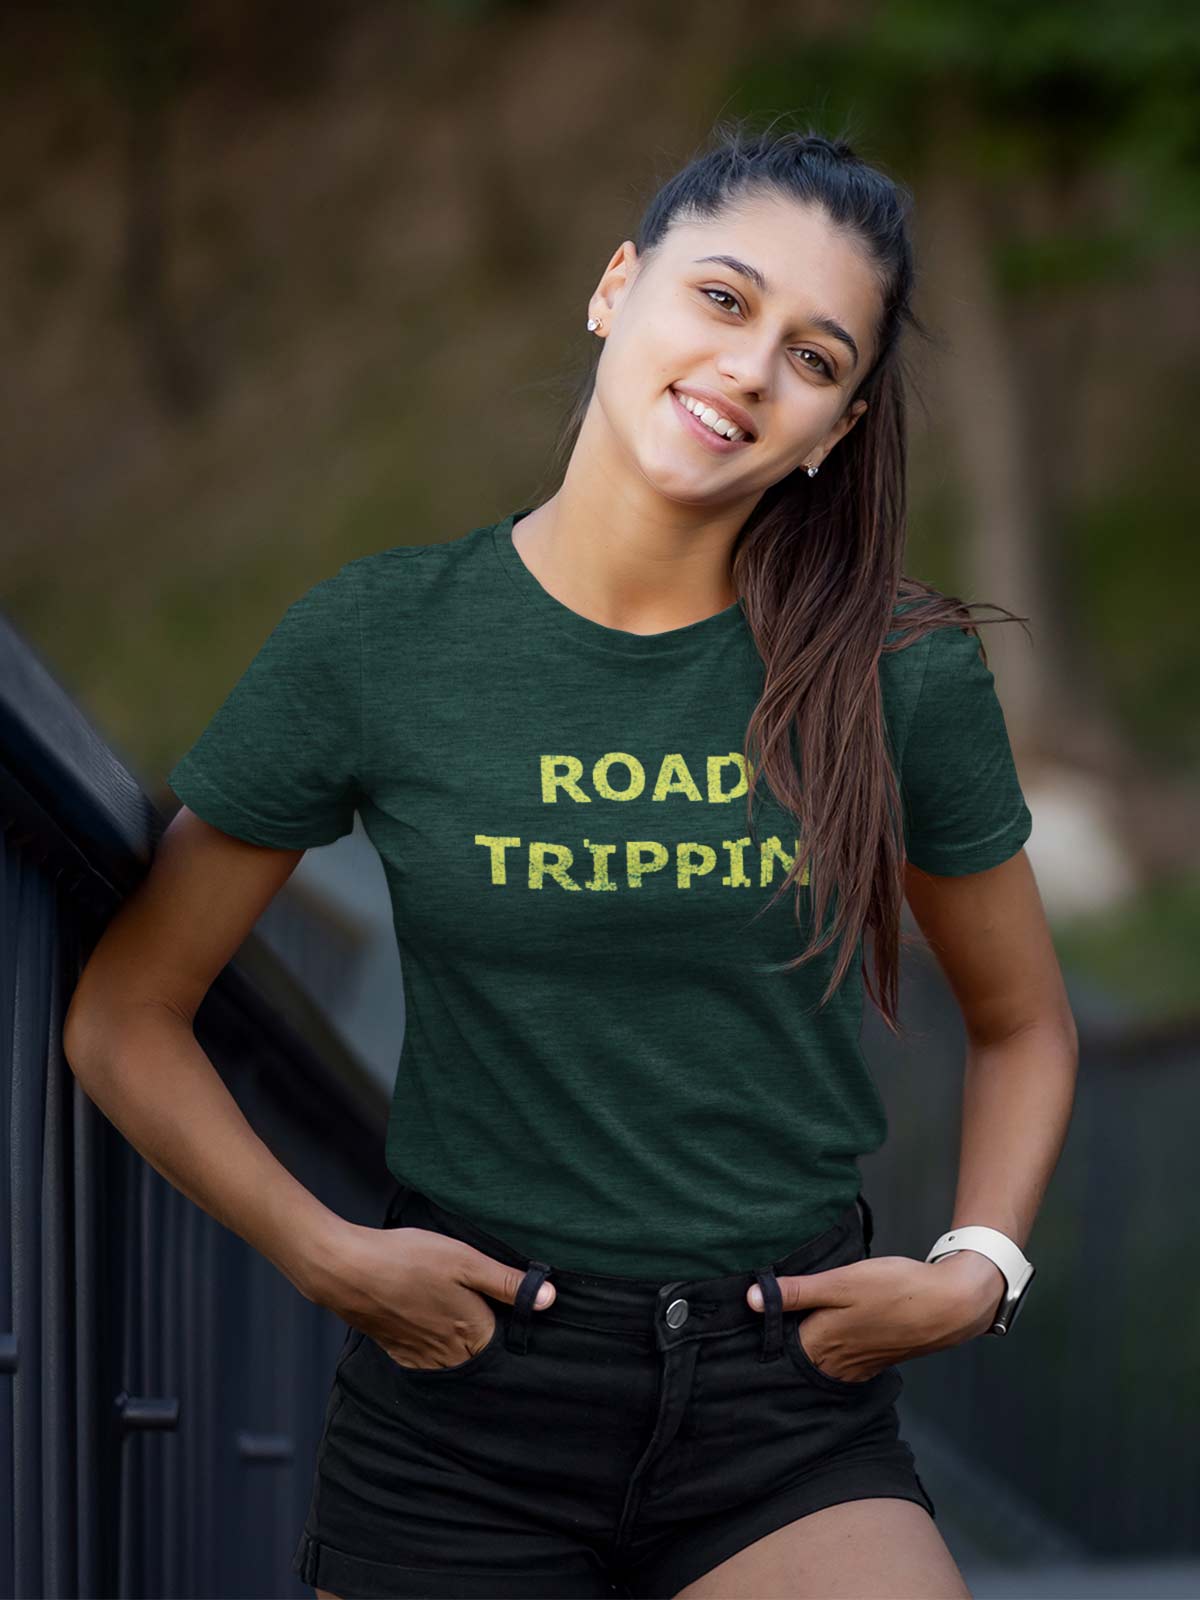 Road-trippin-printed-t-shirt-for-women by Ghumakkad